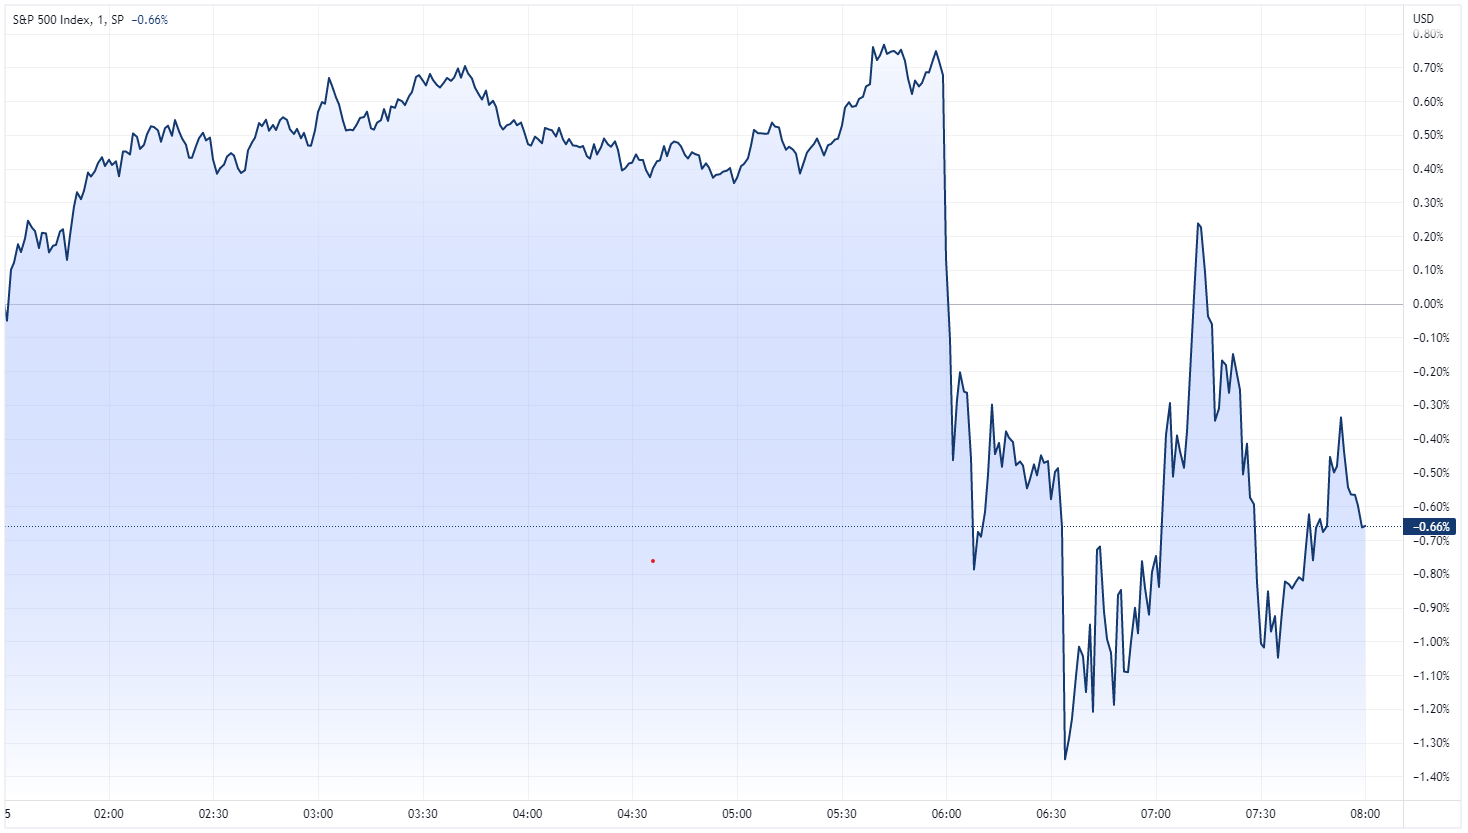 S&P 500 intraday chart